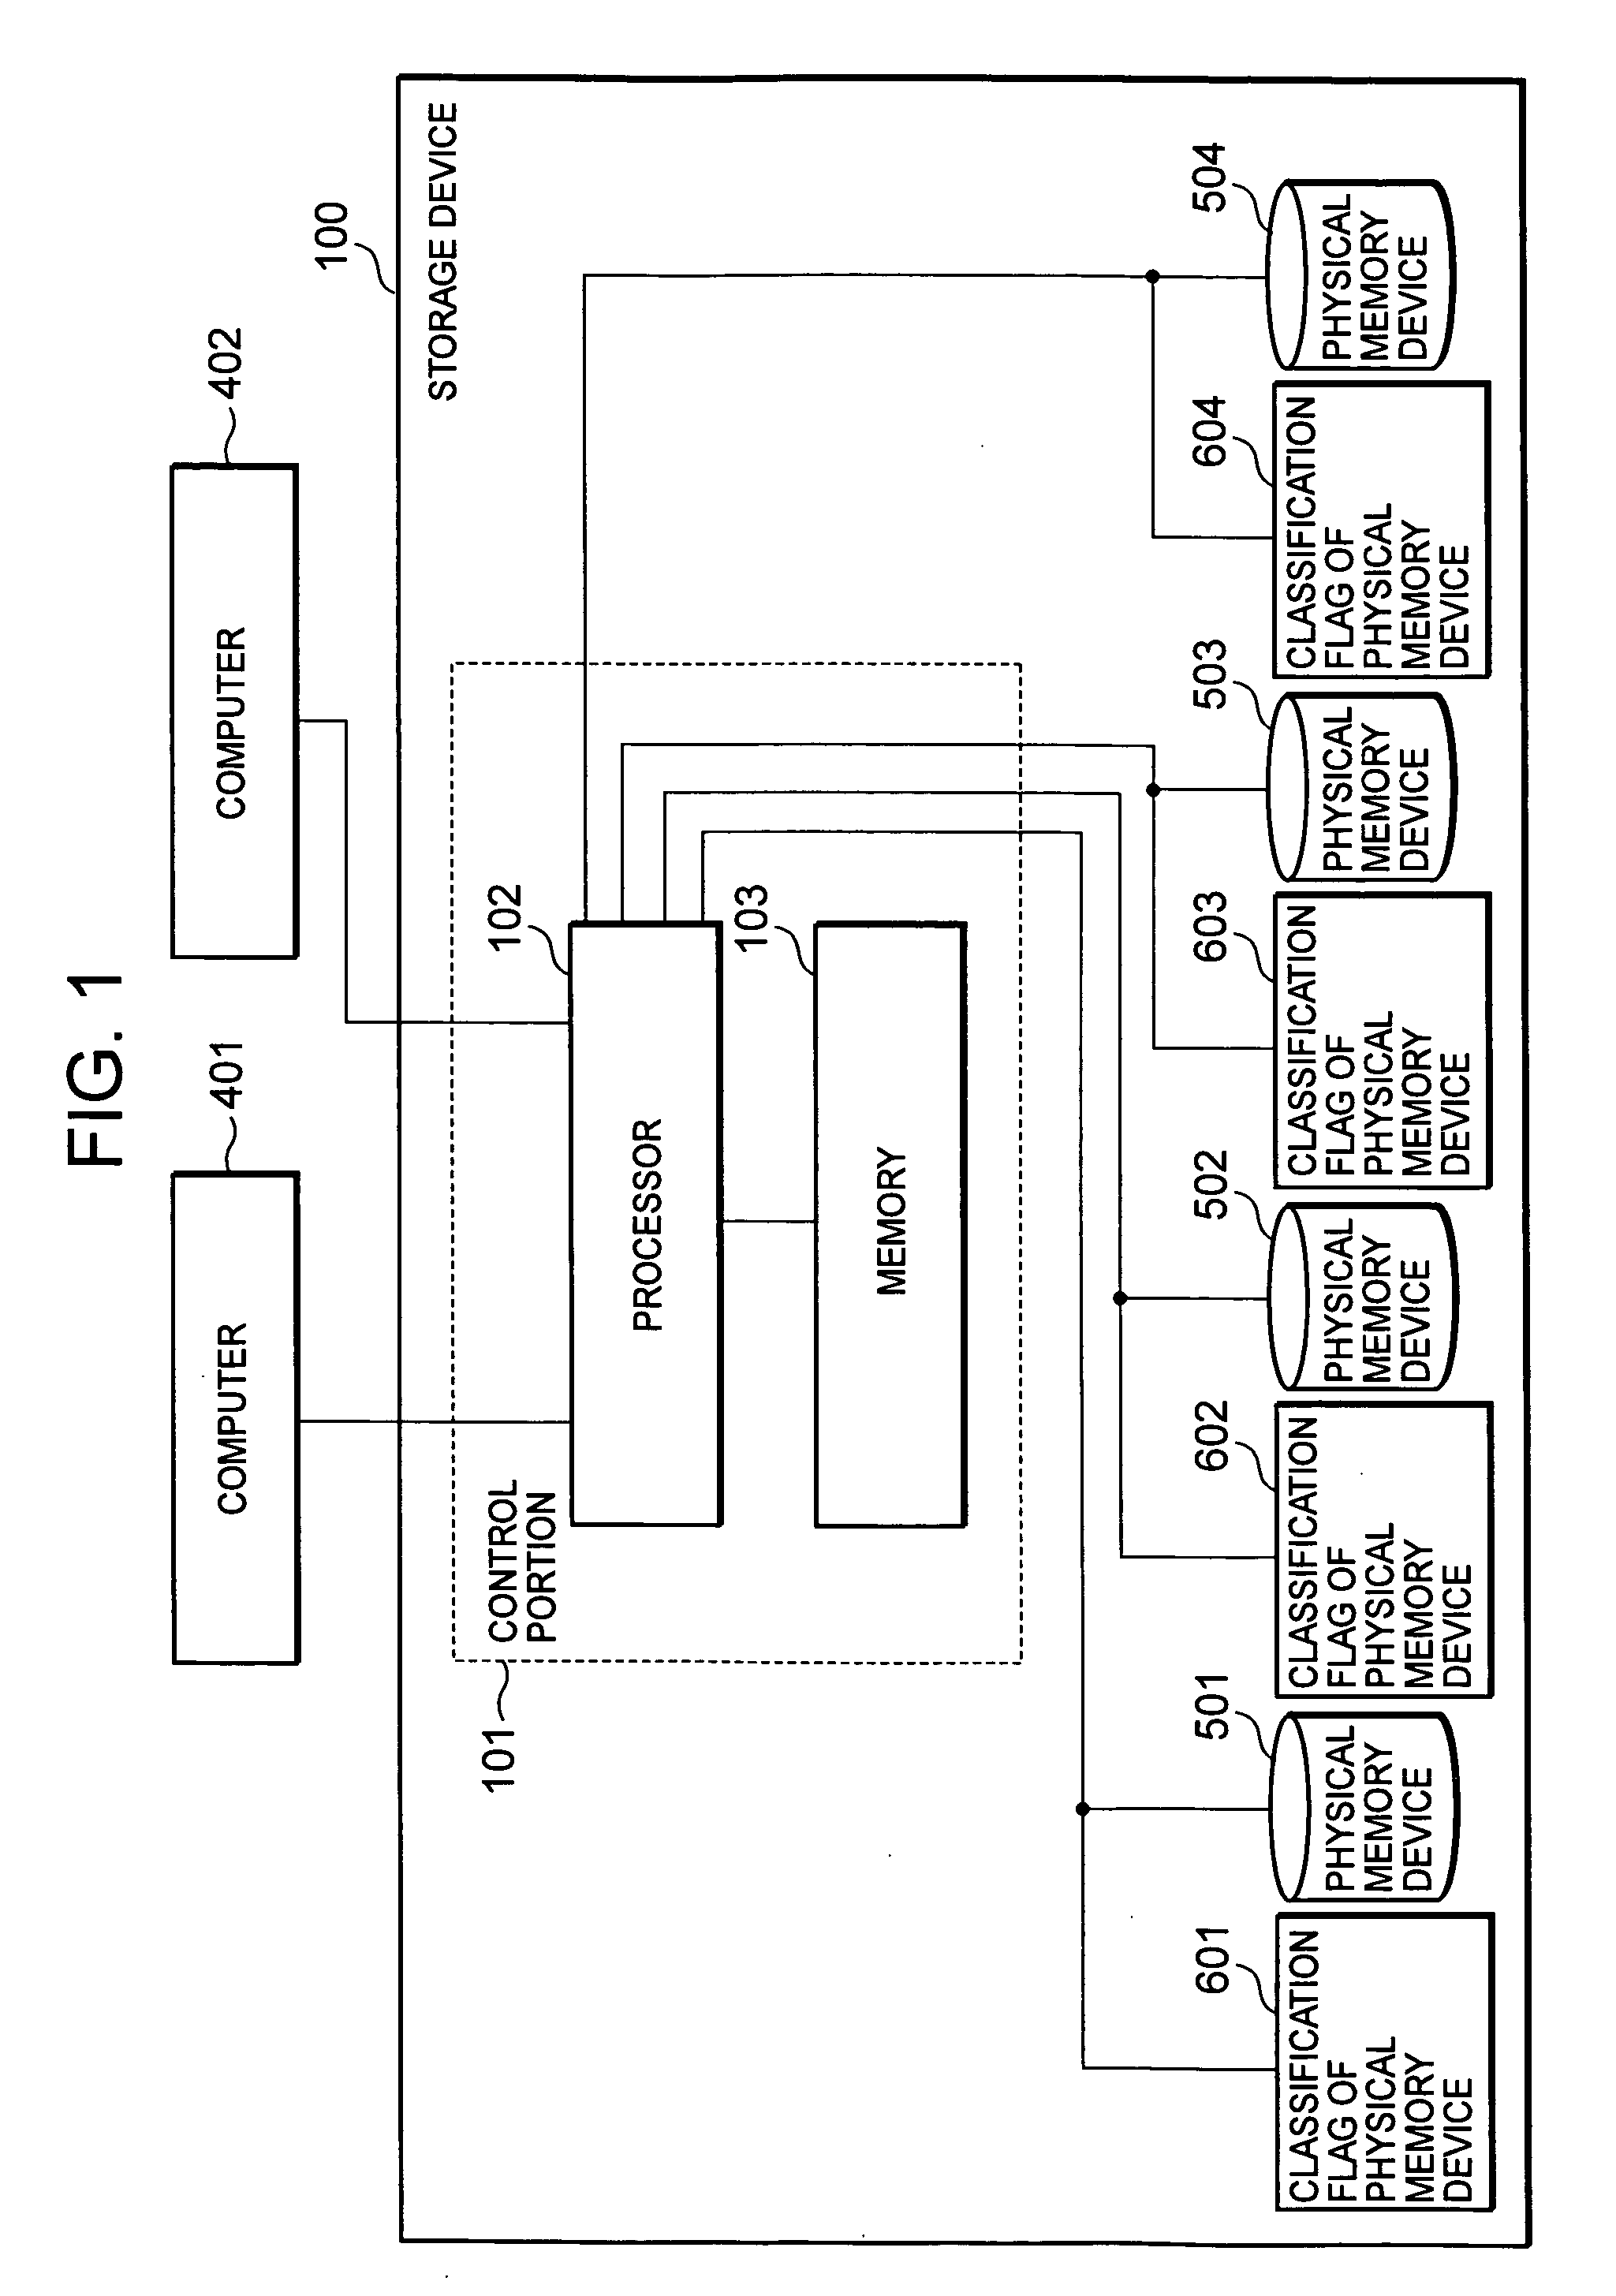 Storage device, control method for partitioning logical memory devices, and medium embodying program for partitioning logical memory devices